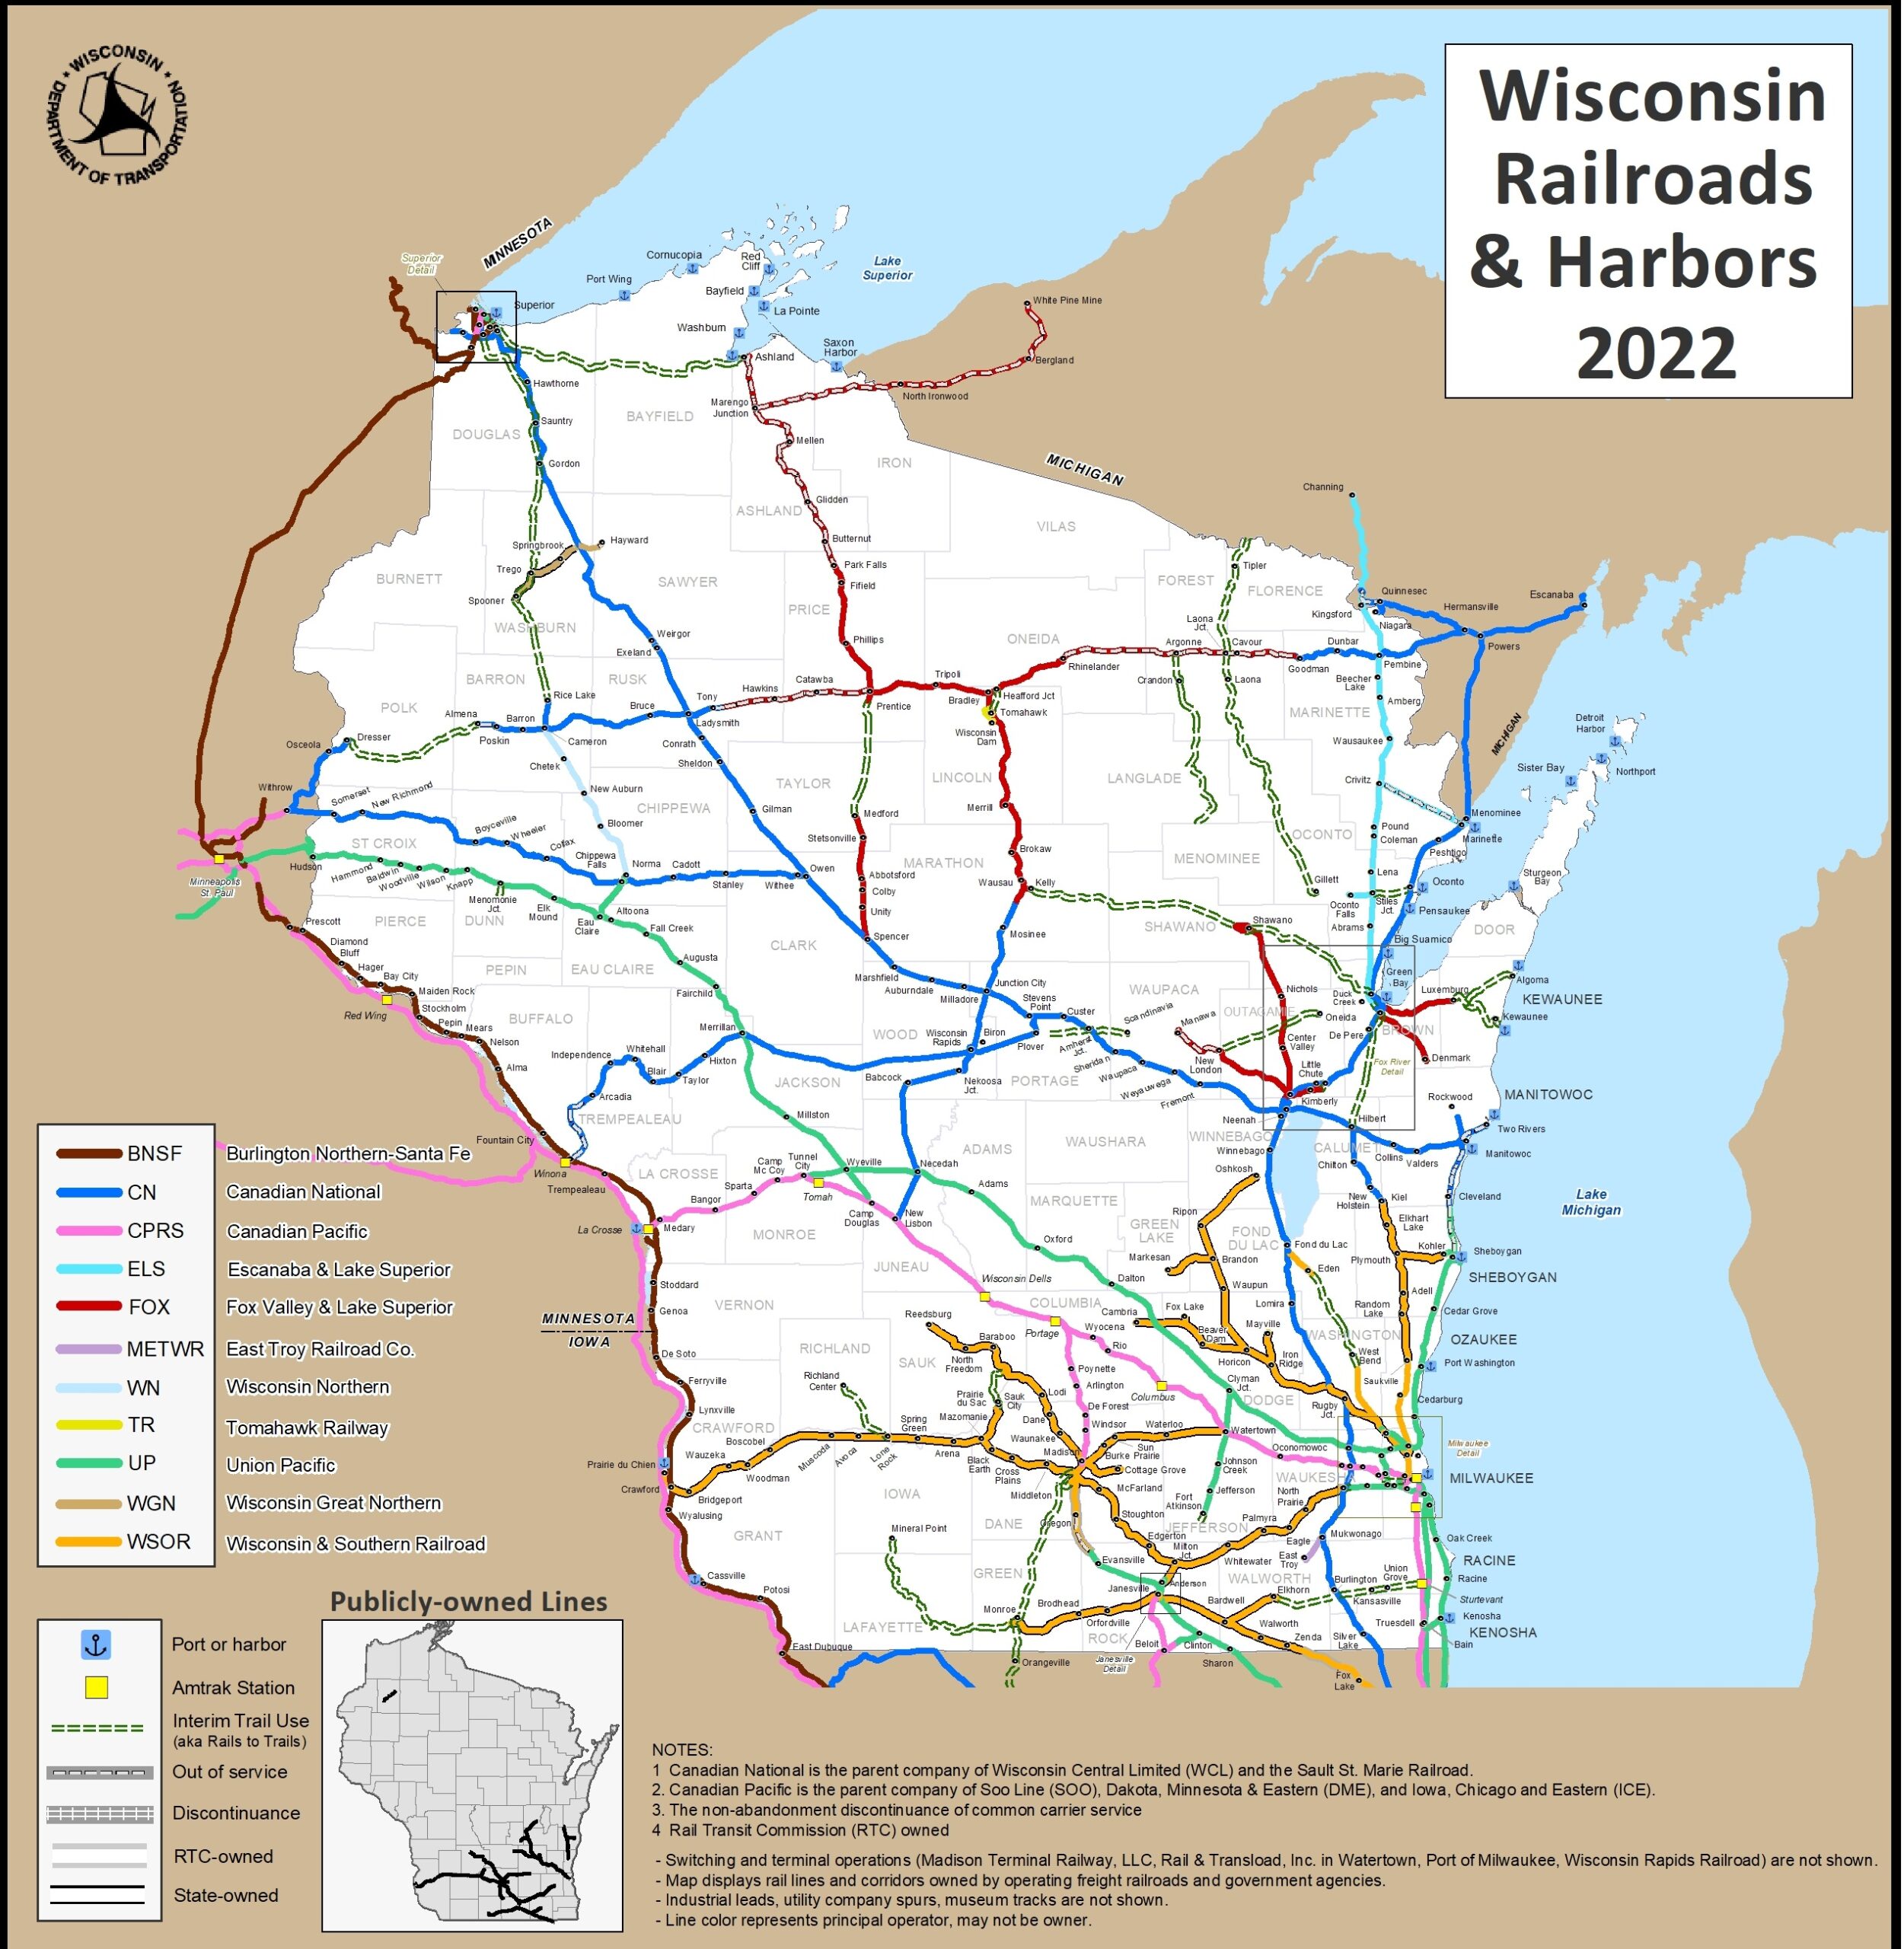 A map of Wisconsin showing the railroads and harbors in the state